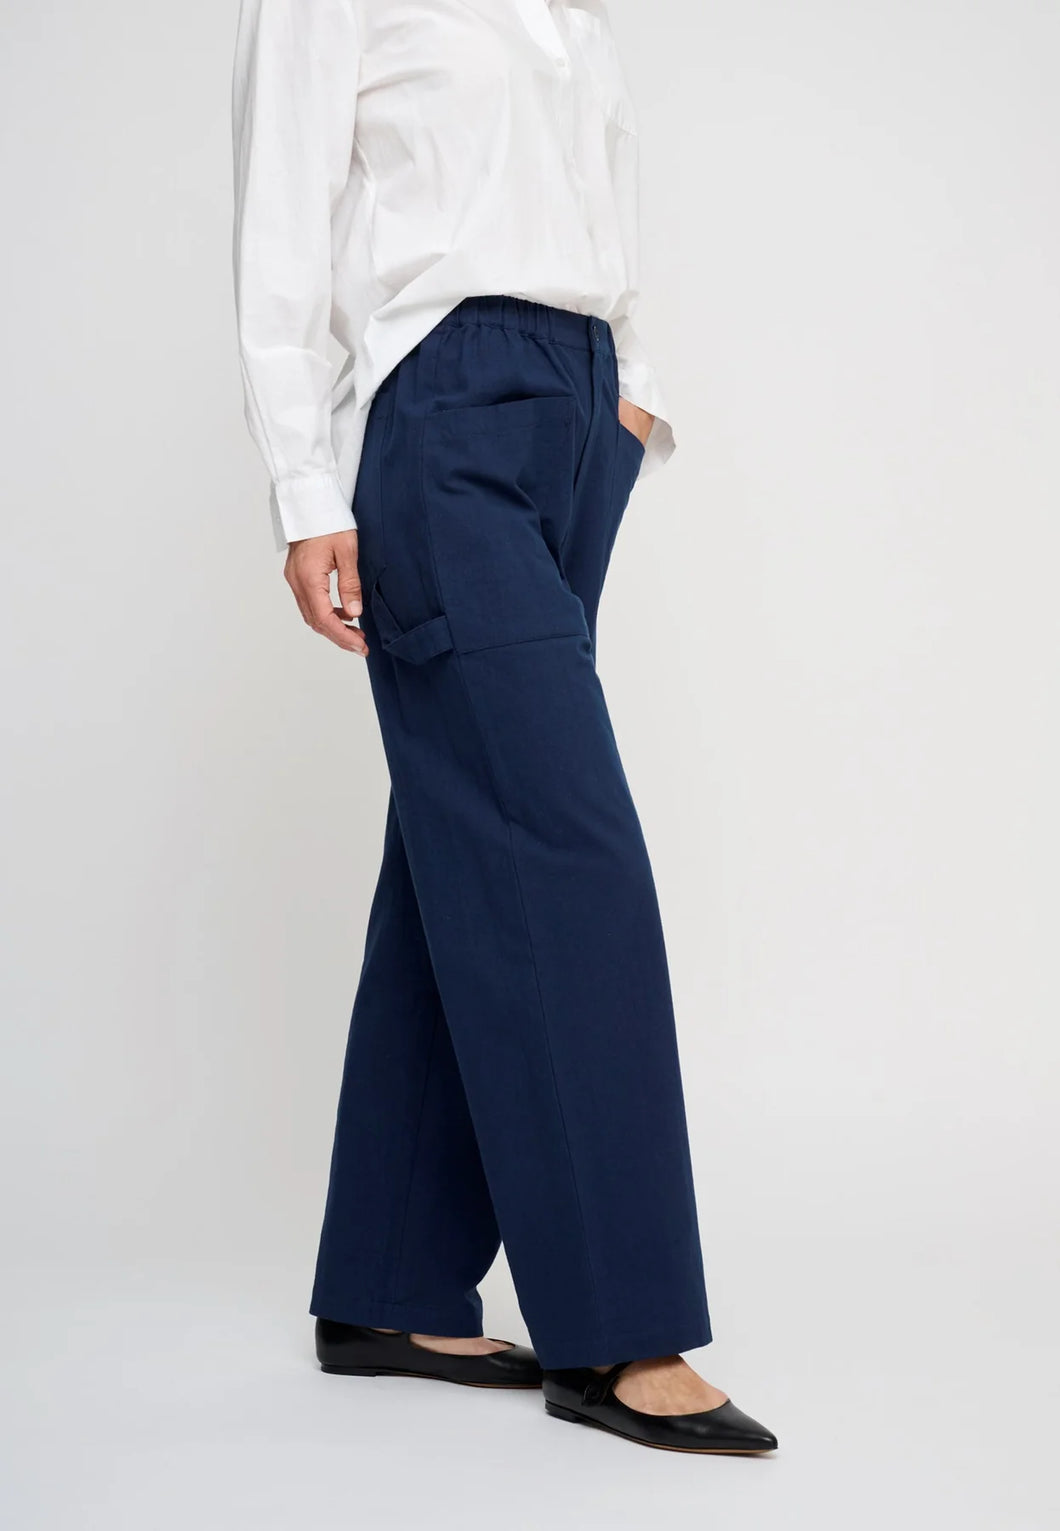 Everly pants crepe navy blue